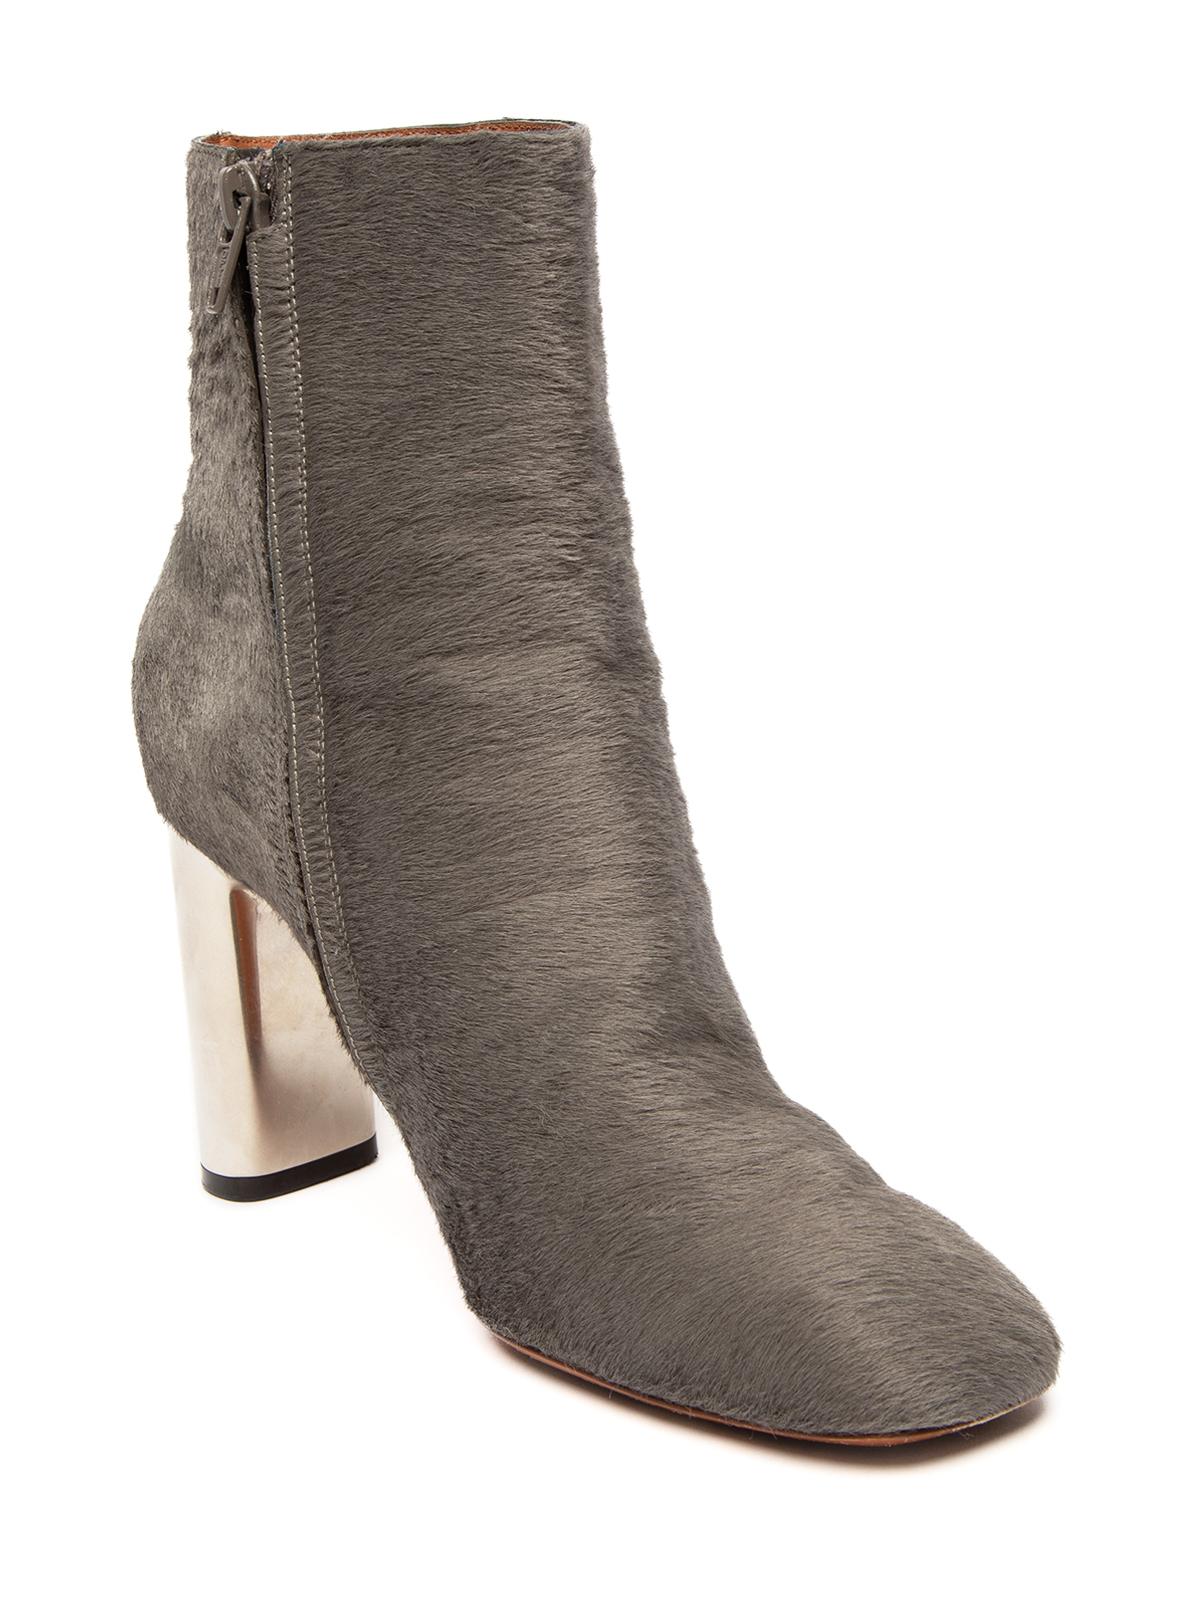 CONDITION is Very good. Very minor wear to boots is evident. Visible wear to outsoles on this used Celine designer resale item. Details Colour - grey Material - pony hair Style - ankle boot Toe style - square-toe Side zip fastenings Metallic heel